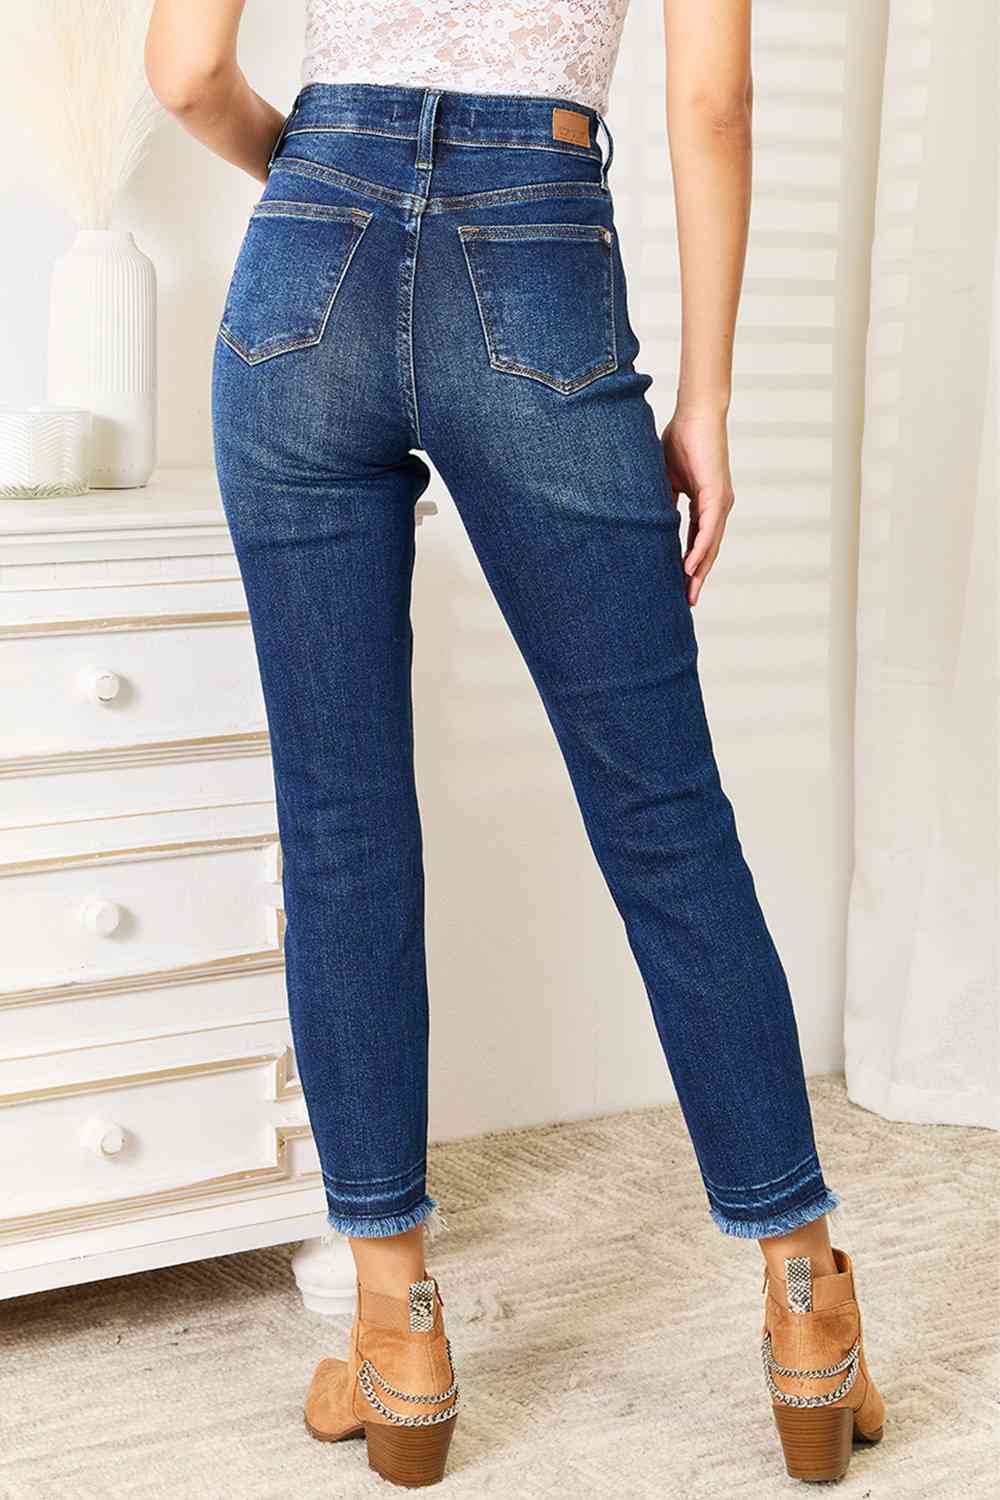 Back View, Judy Blue, High-Rise Released Hem Slim Jeans Style 88704